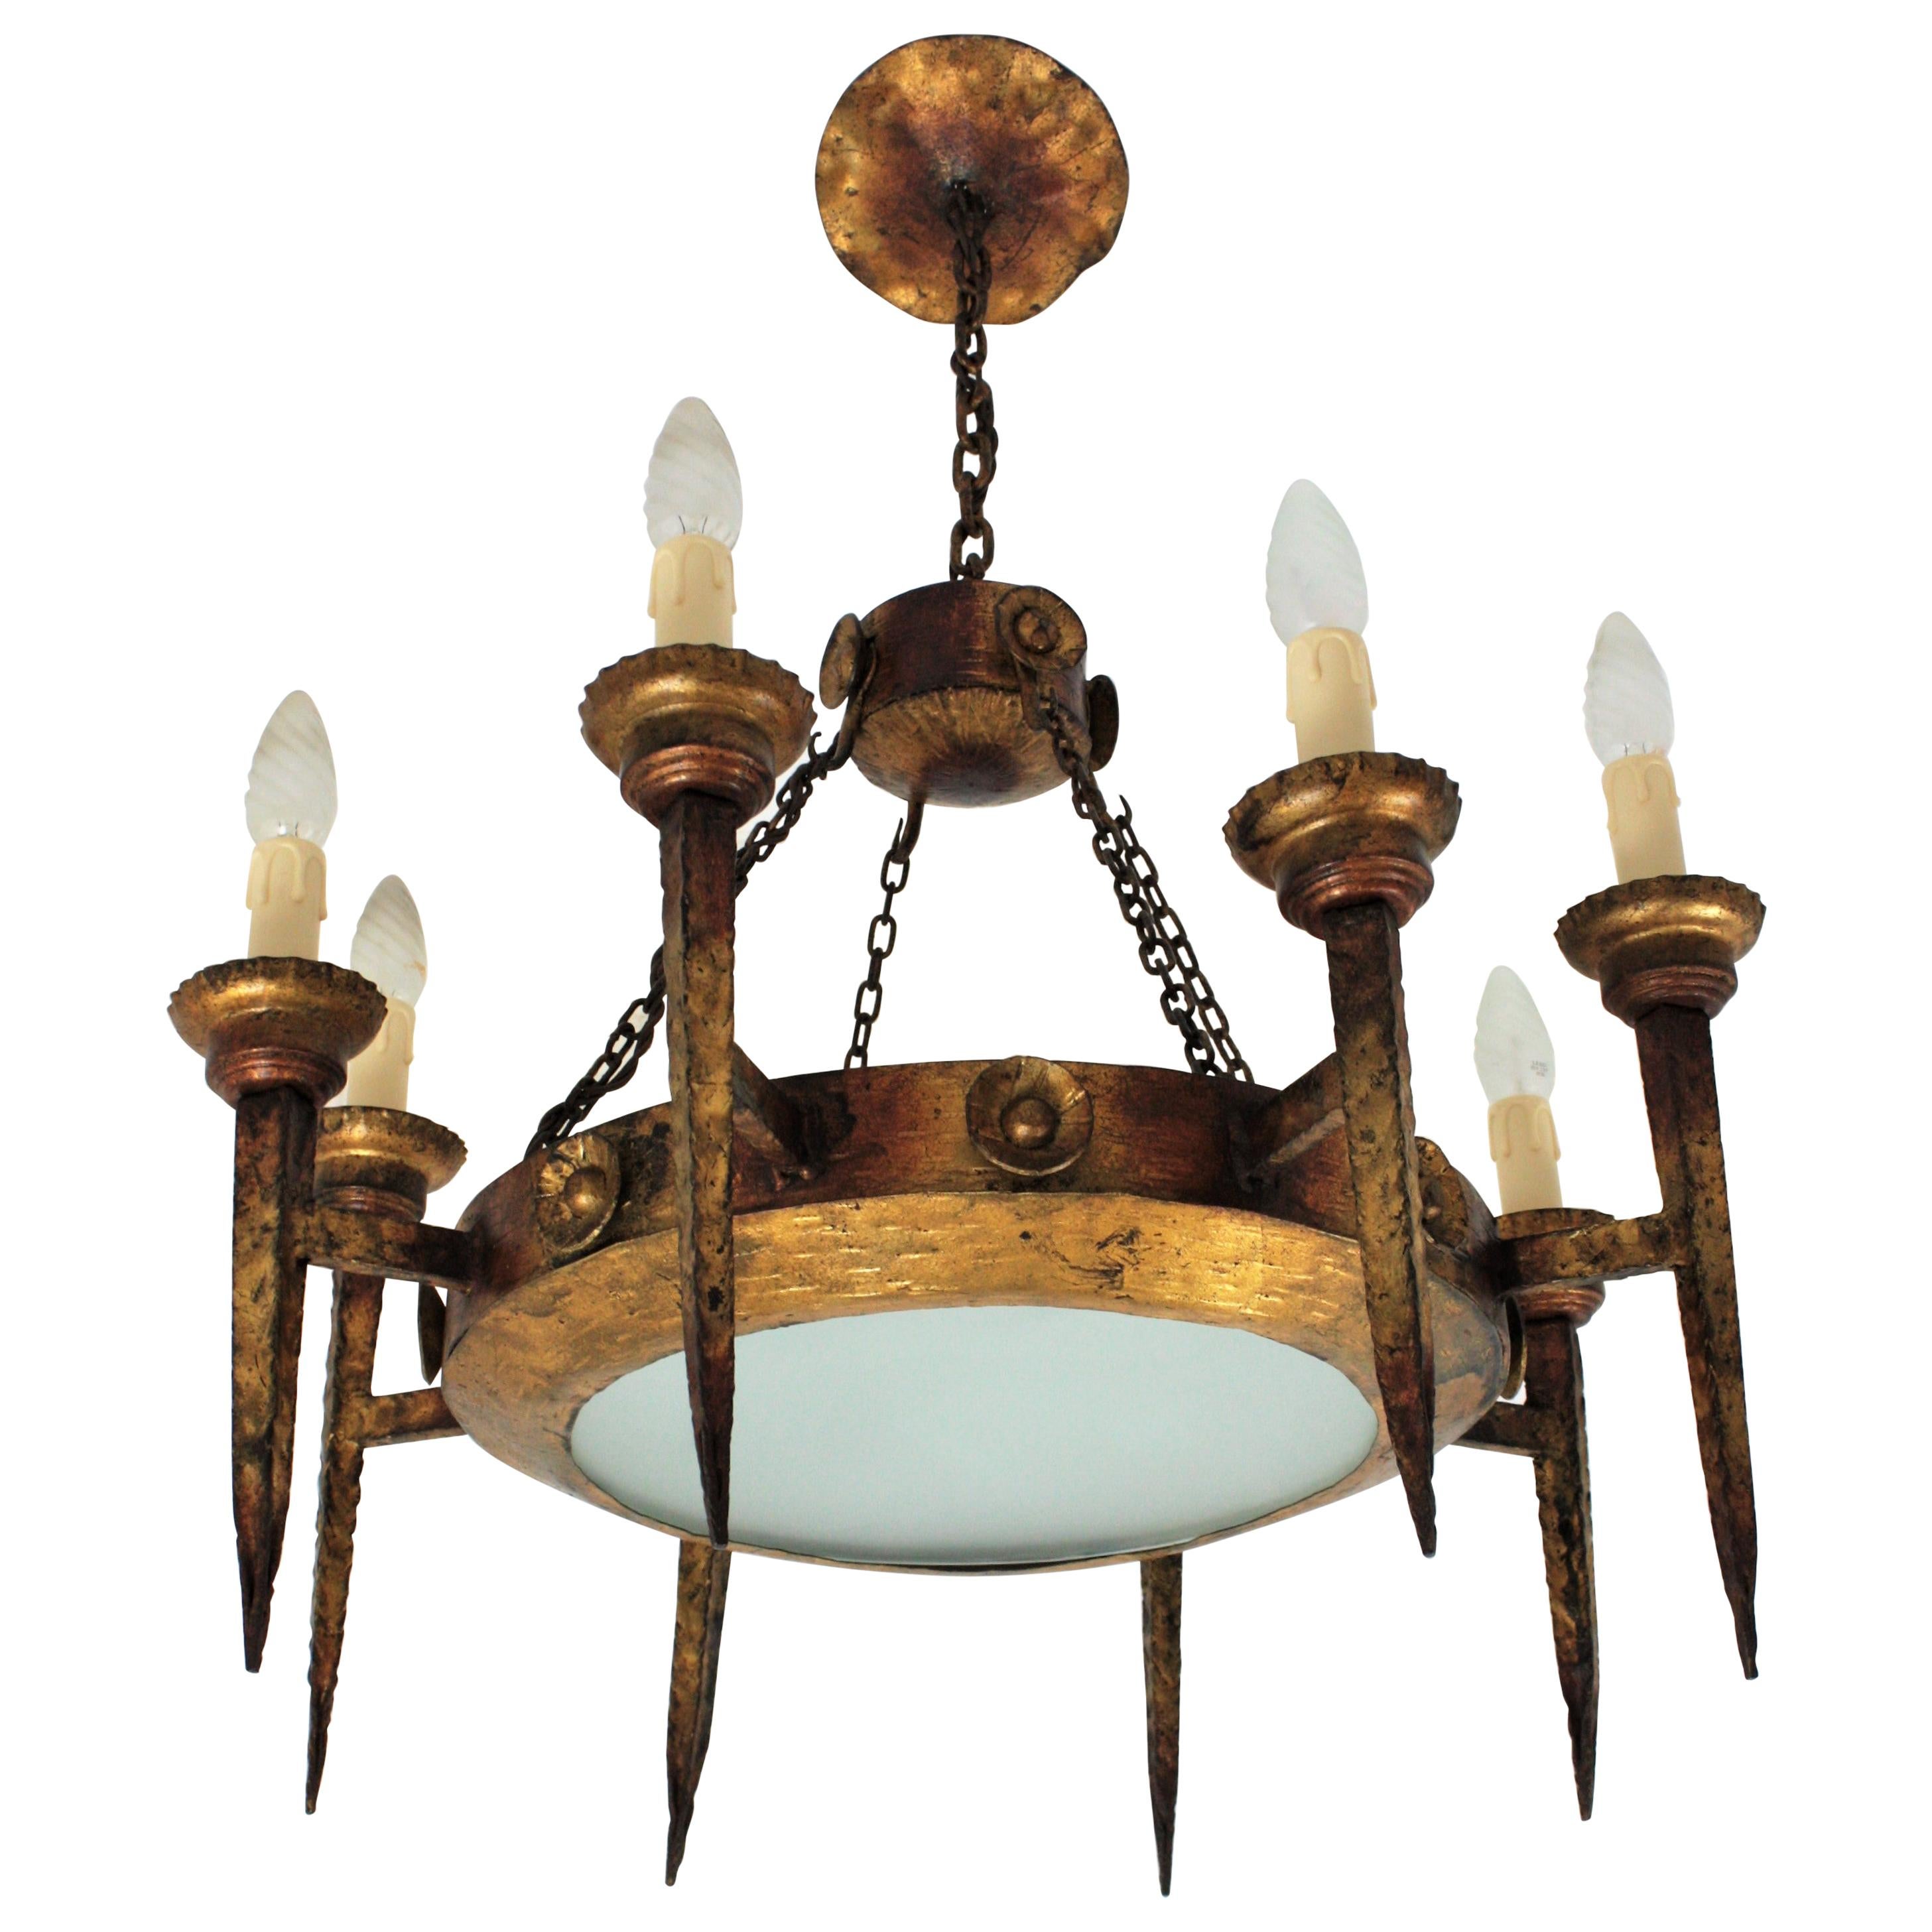 Ring Chandelier with Eight Torch Lights, Wrought Iron, Spain, 1930s
Outstanding large wrought gilt iron ring chandelier with 8 torch arms and central glass light diffuser. 
This spanish early 20th century torchere chandelier features a central iron